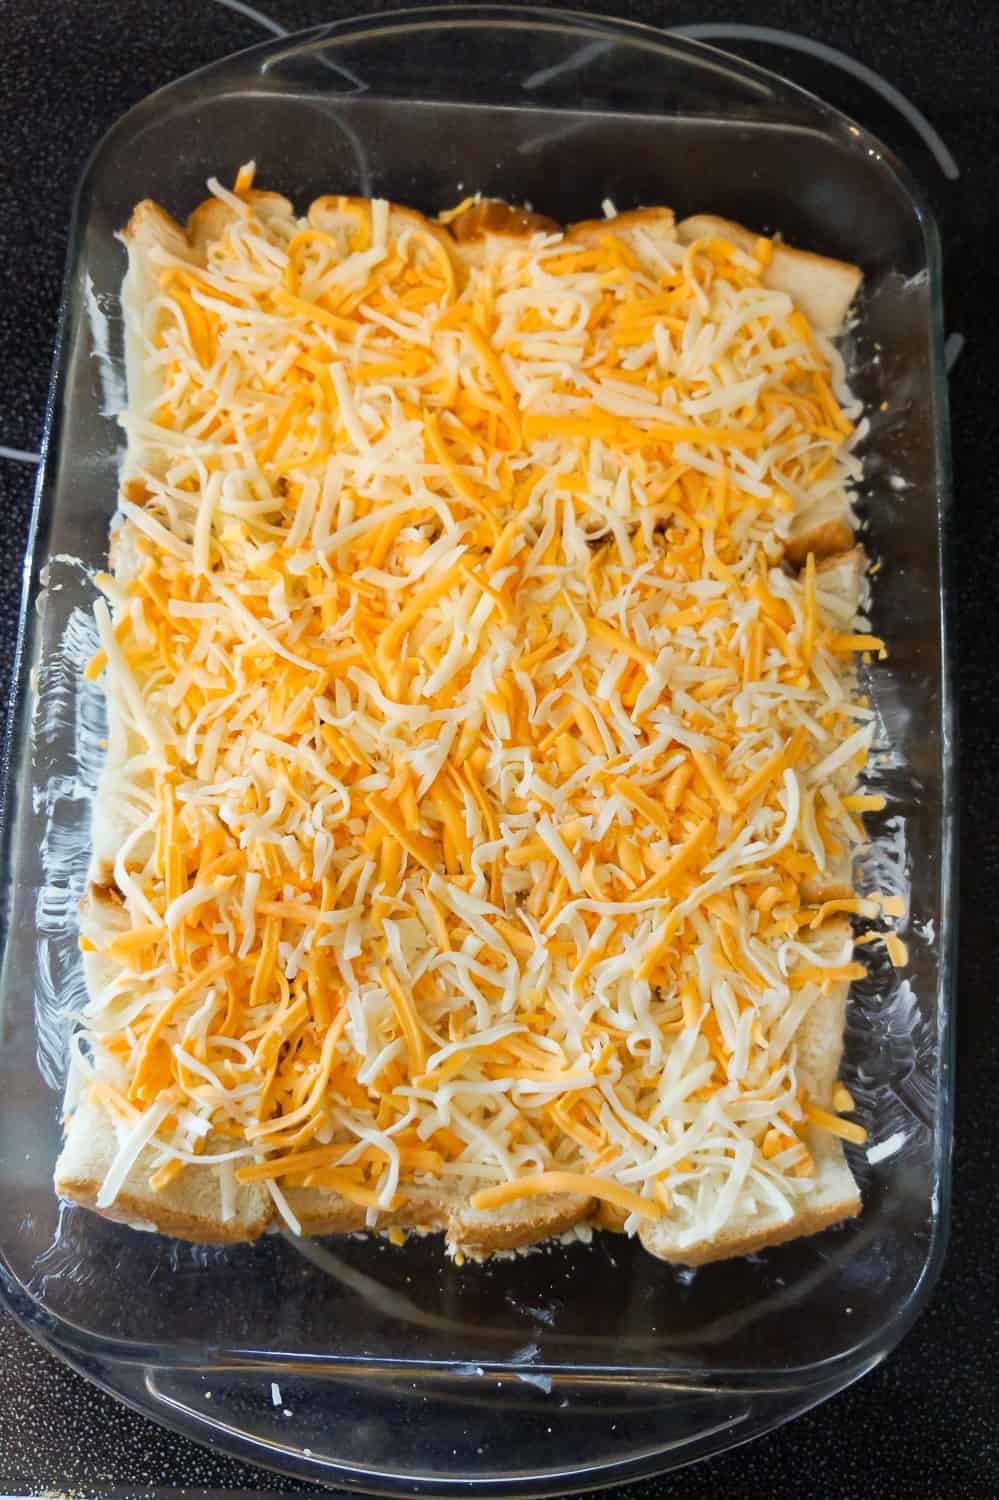 shredded mozzarella and cheddar cheese on top of bread in a baking dish